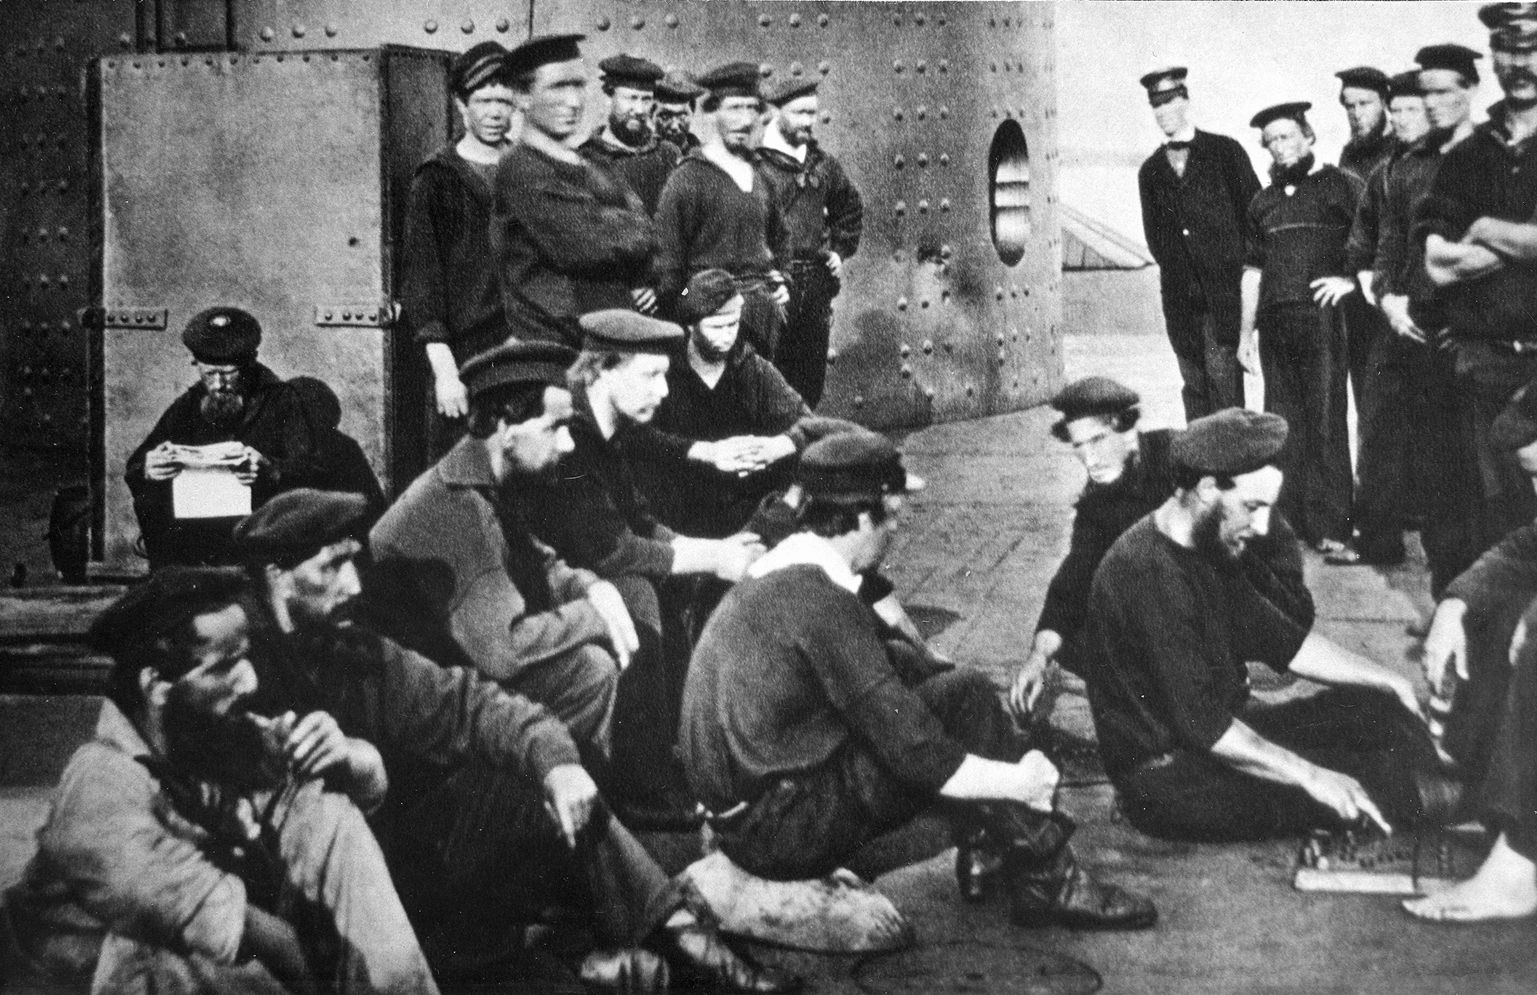 Union sailors relax on the flat deck of the Monitor after the battle. The damage inflicted by the CSS Virginia can be seen in the Monitor’s dented turret. 